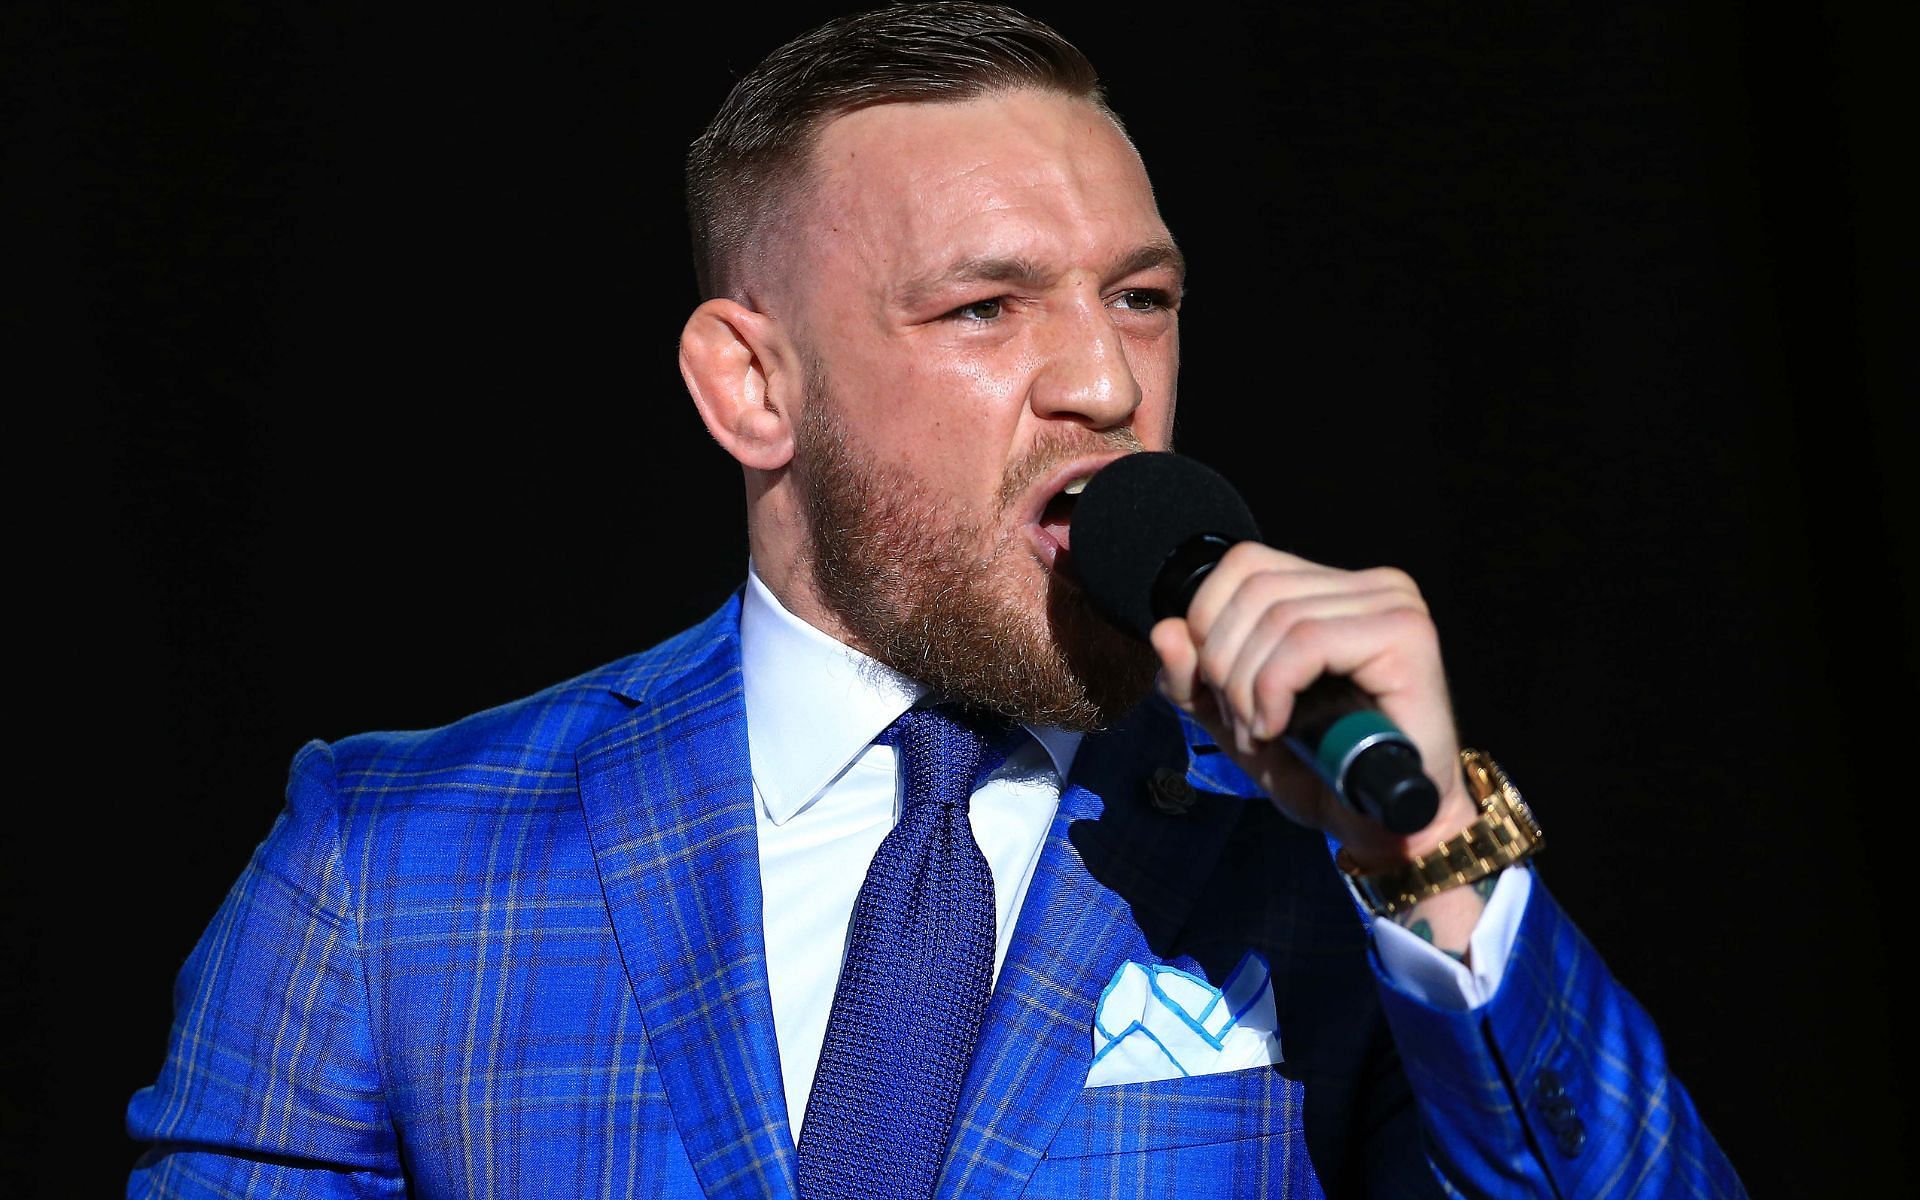 Conor McGregor has voiced his opinion on the constitutional referendums. [via Getty Images]